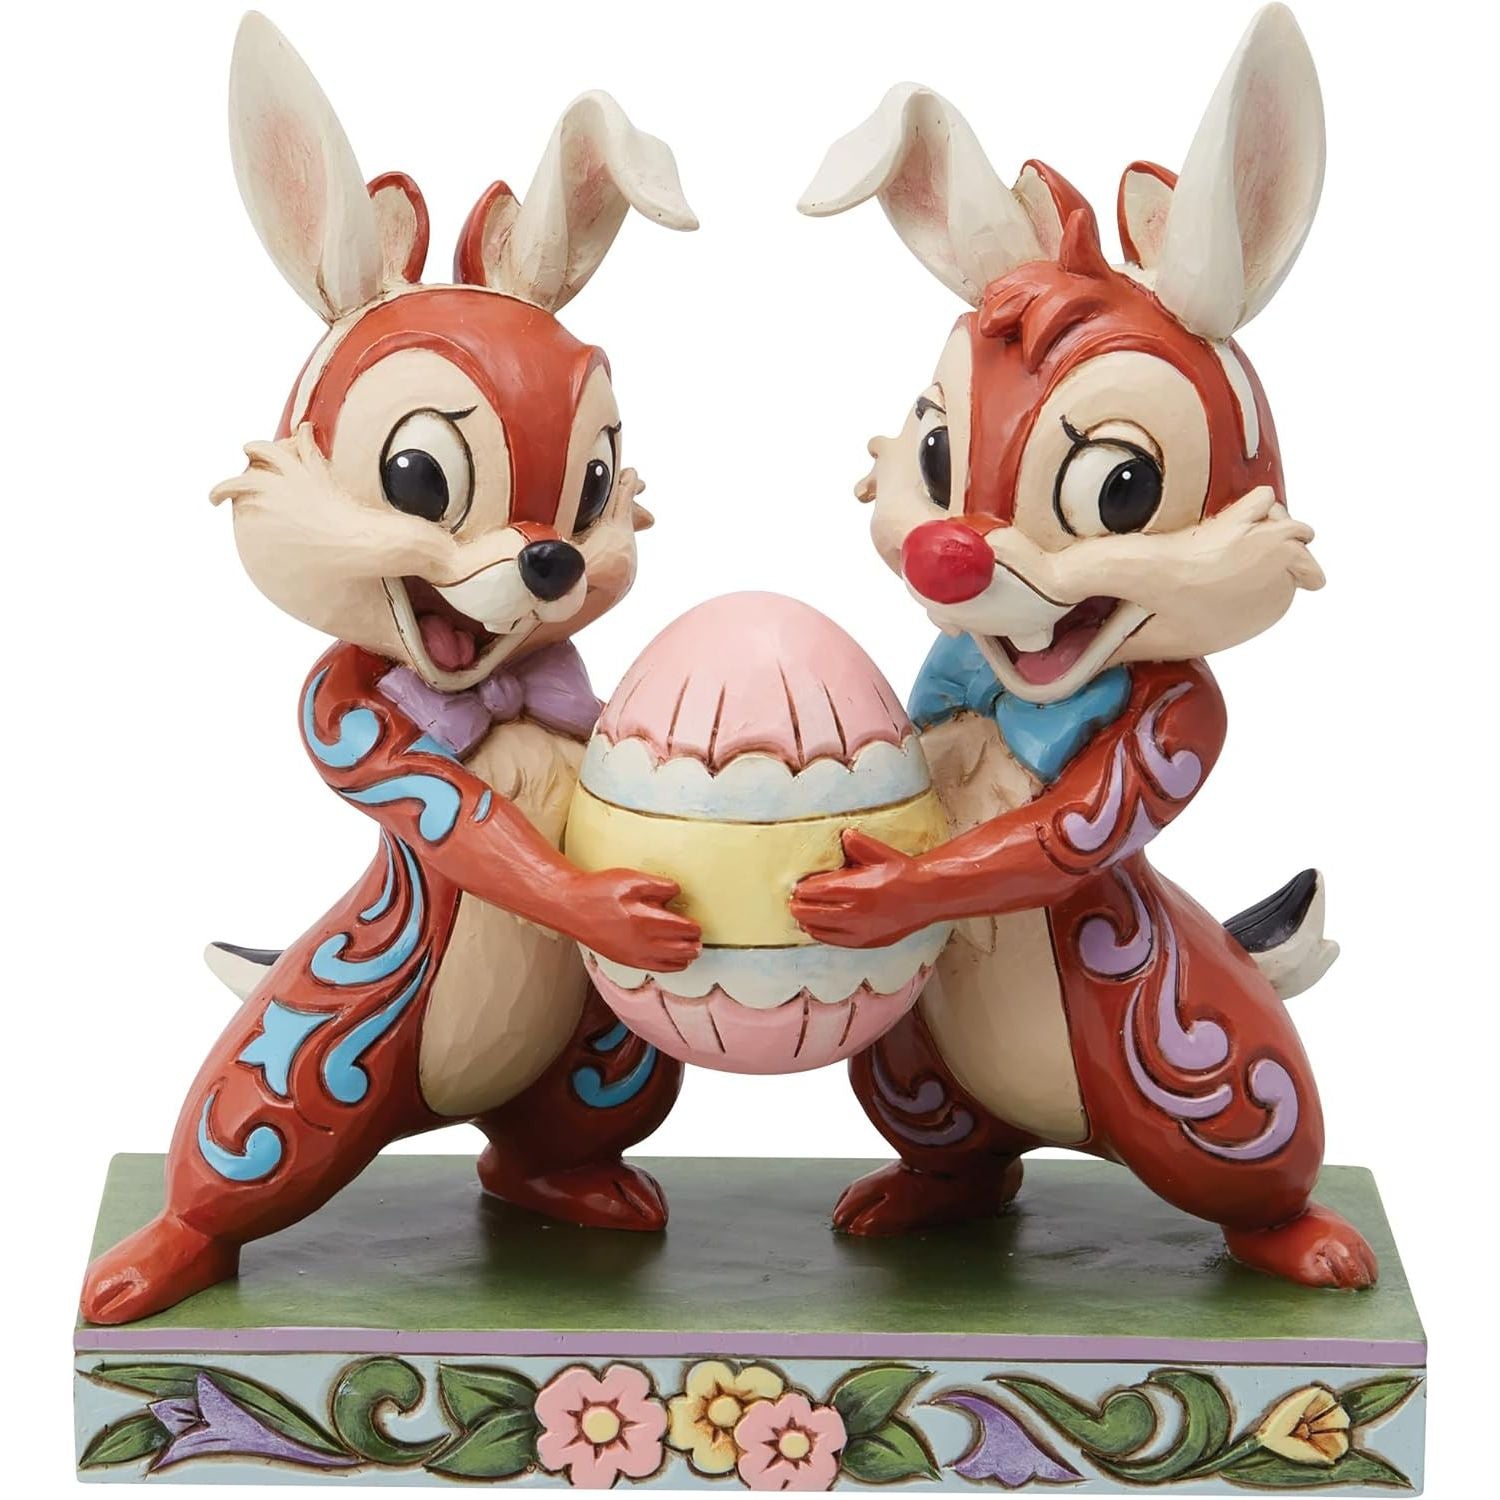 Disney Traditions by Jim Shore Bunny Chip and Dale Easter Egg Figurine, 5.51"